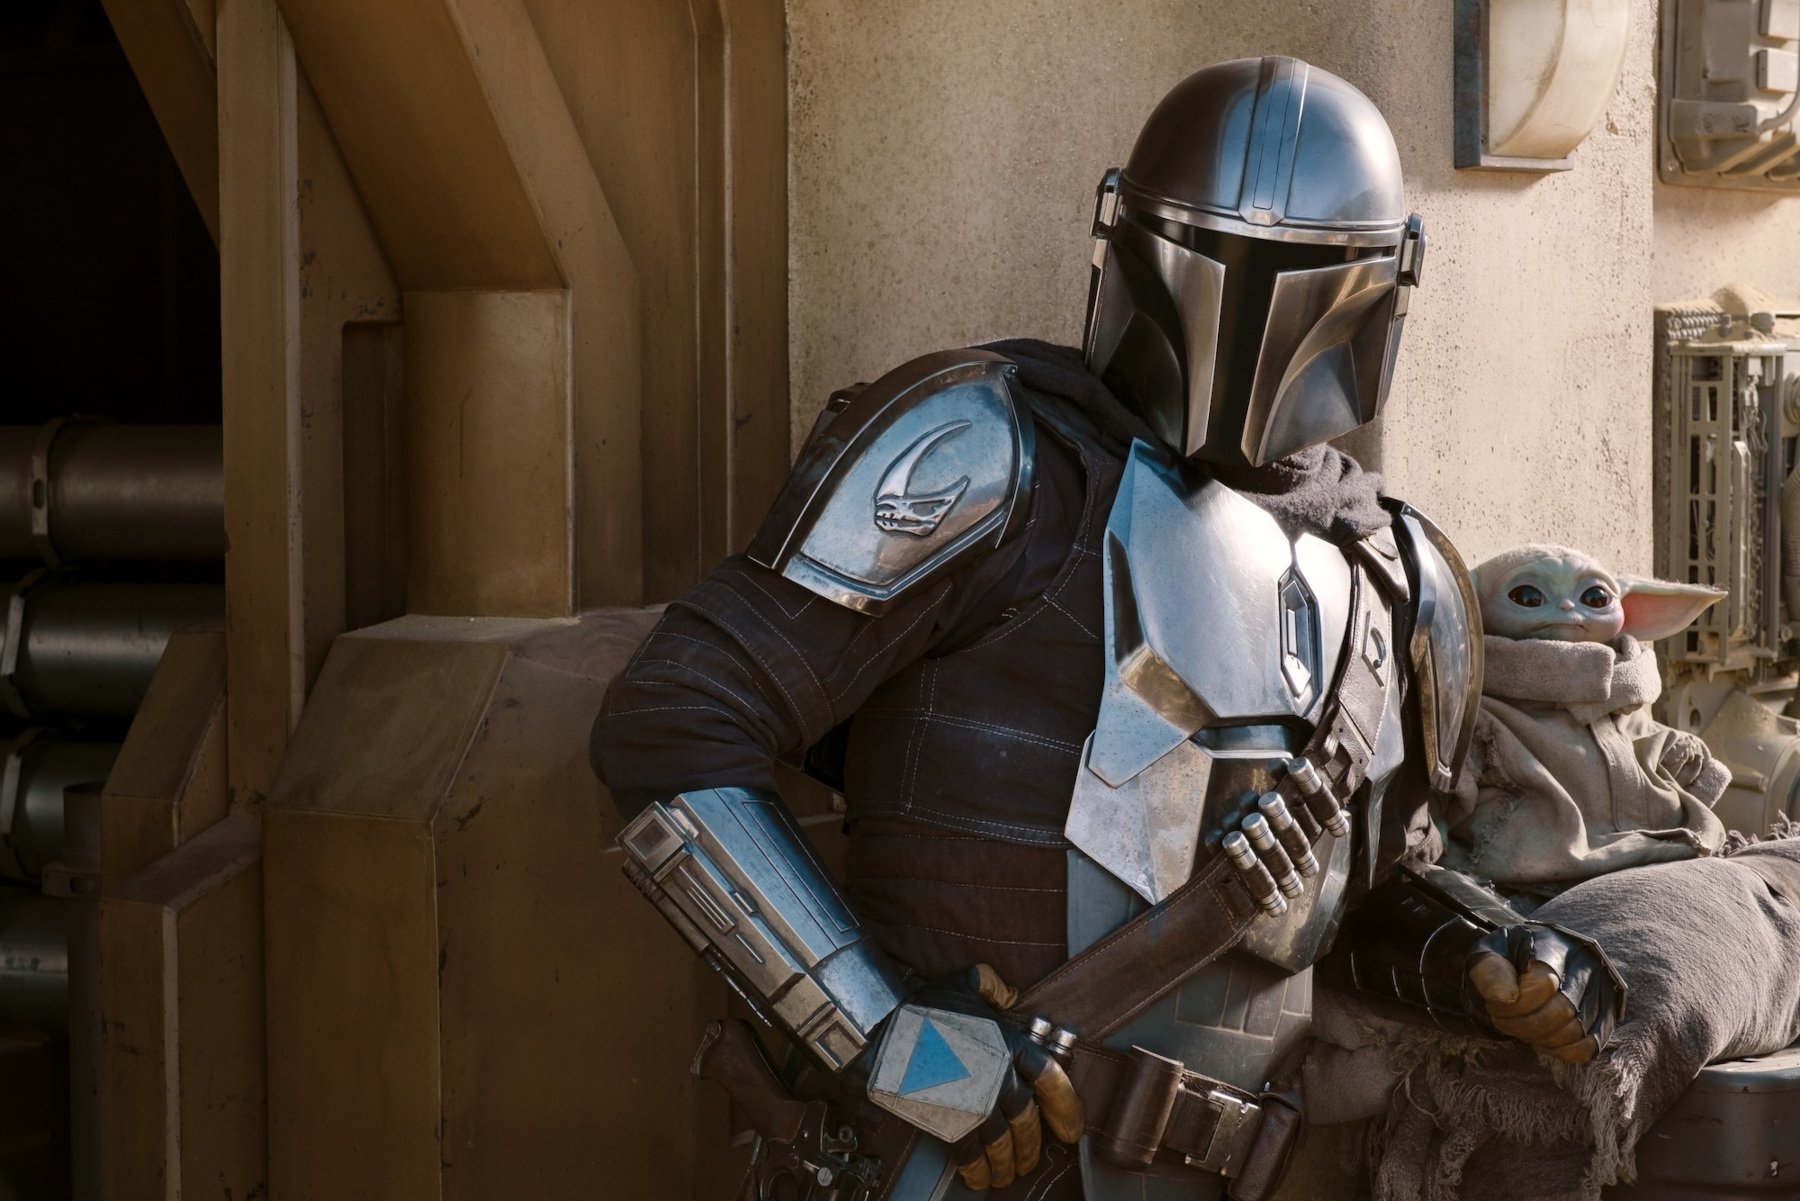 ‘The Mandalorian’ Season 3 Release Date Set for March: Here’s What to Expect